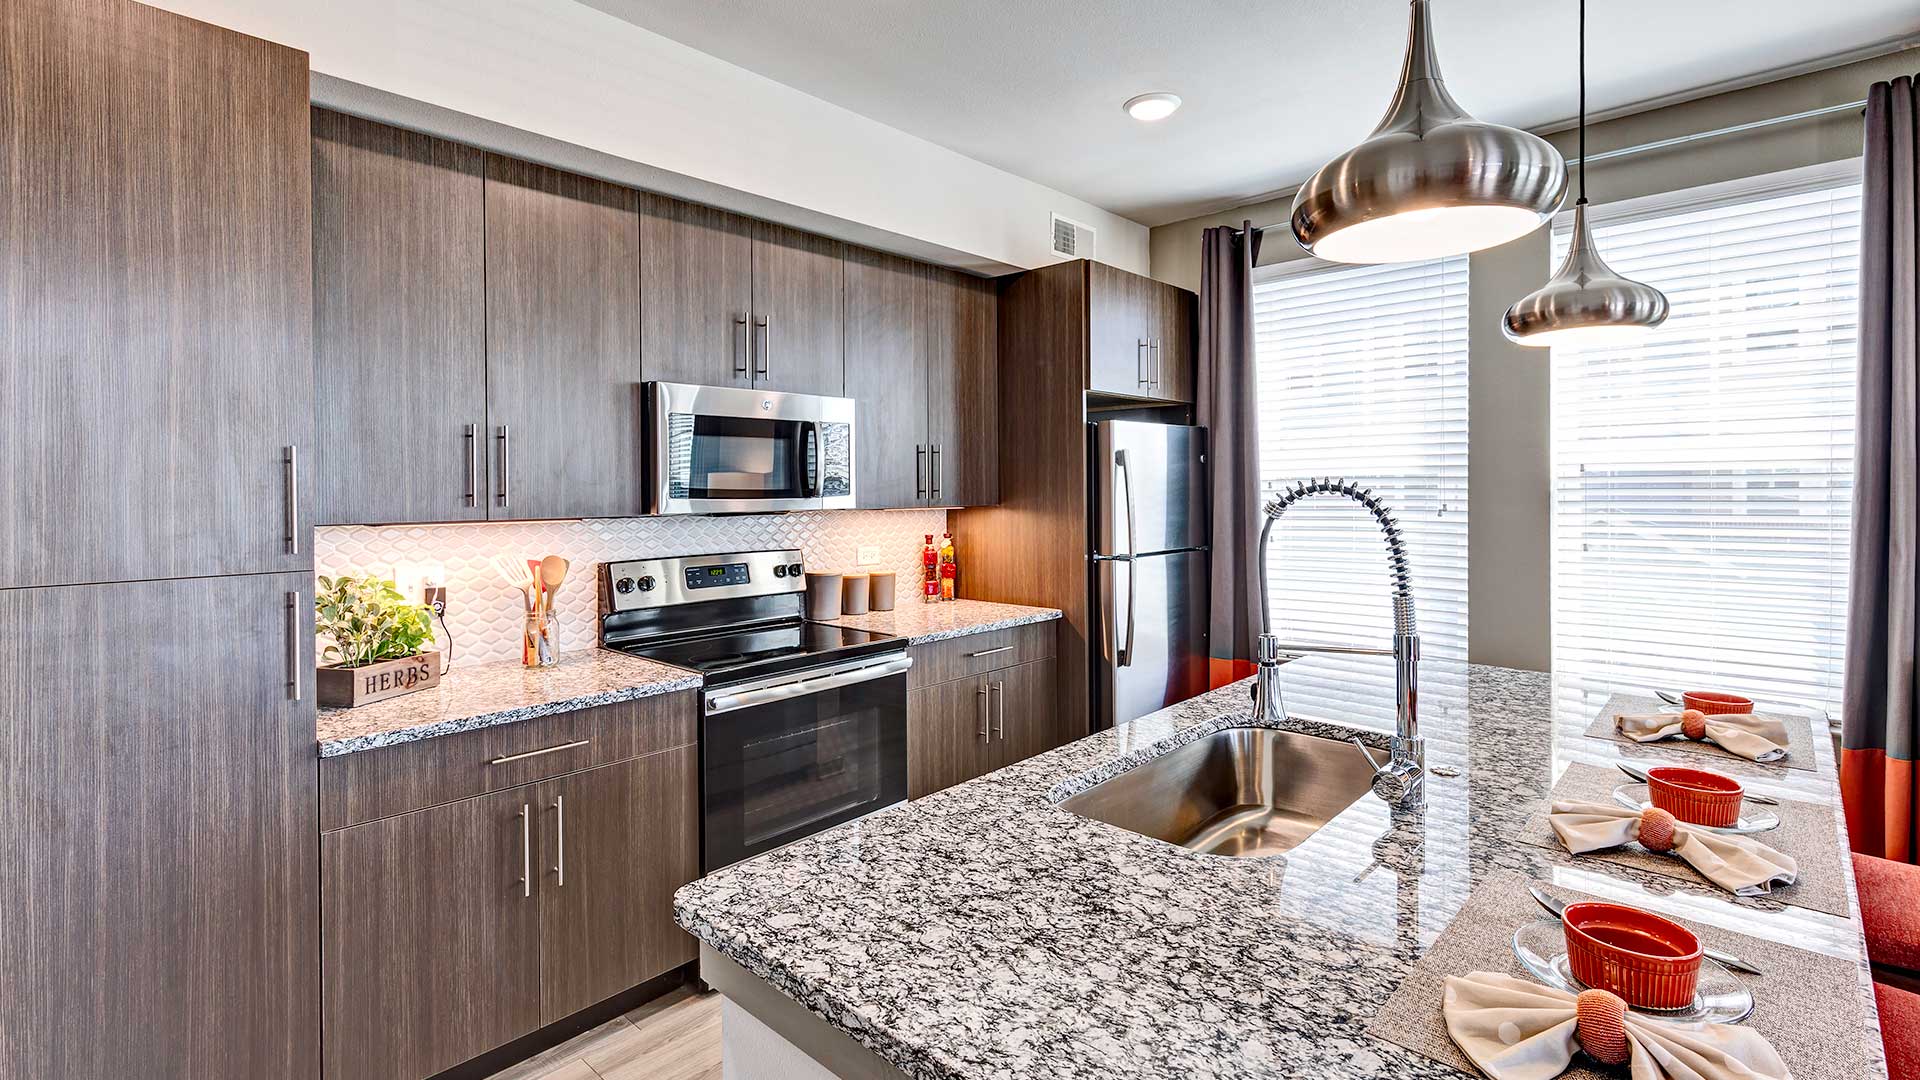 Looking at an angle across a kitchen island with three place settings along the right at the kitchen against the left wall. It has stainless steel appliances and brown cabinets.